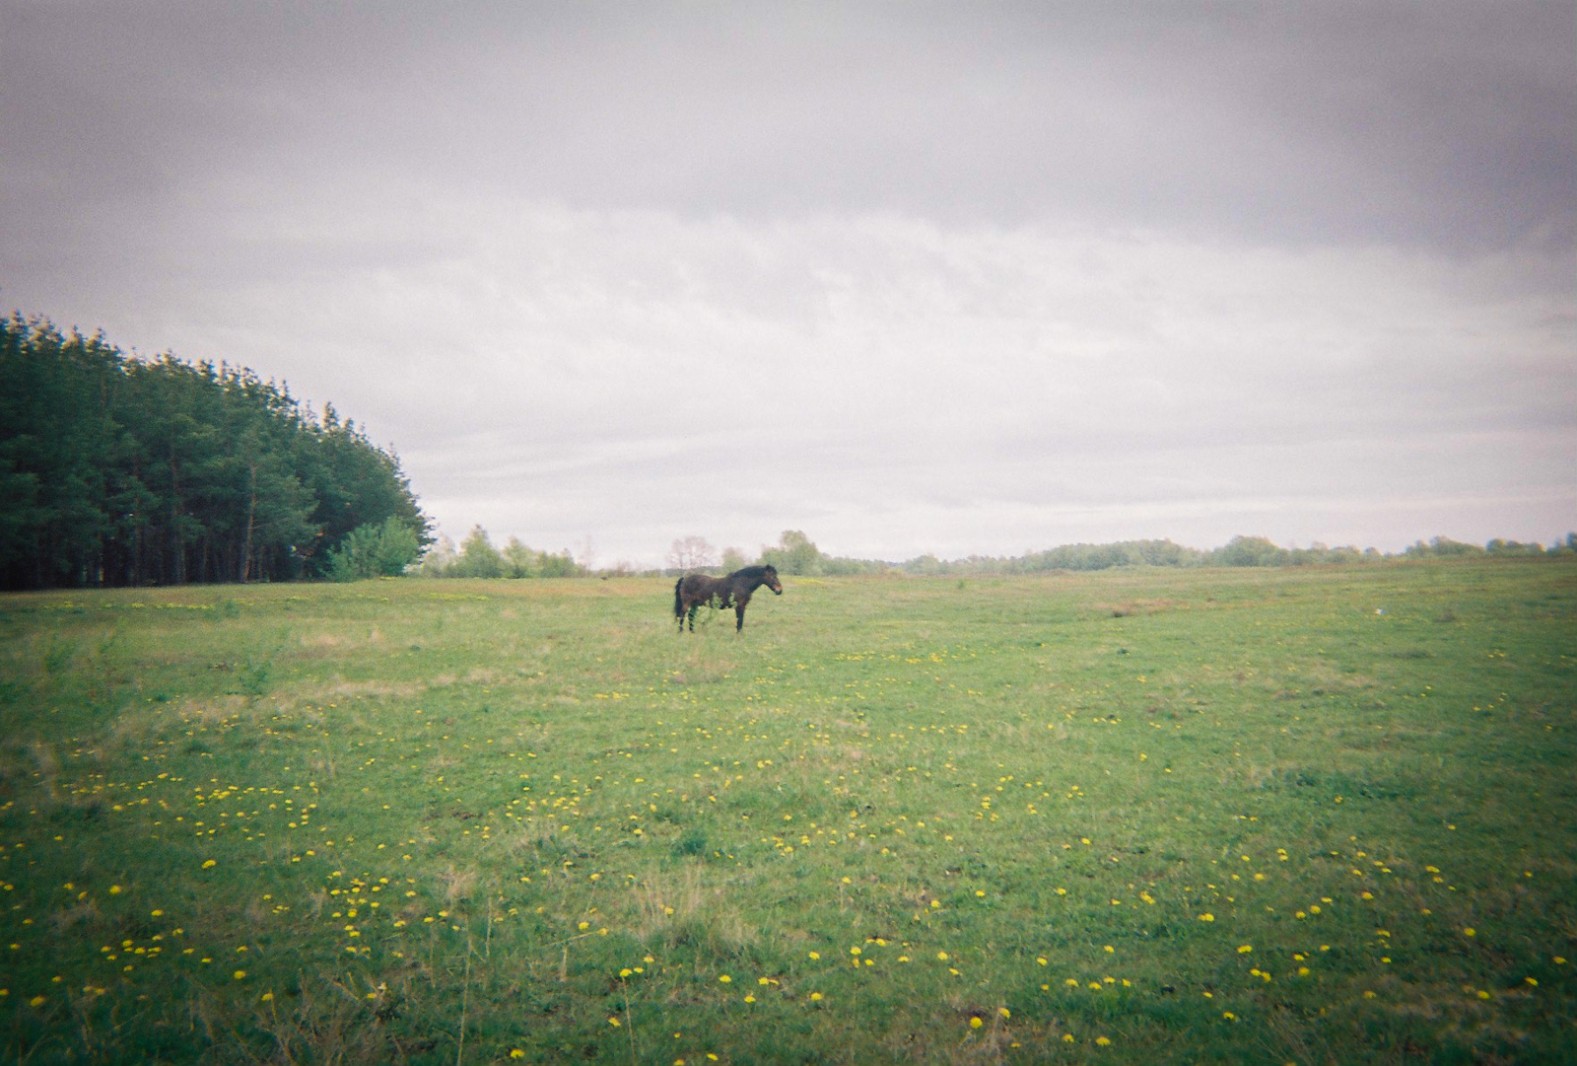 A horse stands in a field near Chernobyl